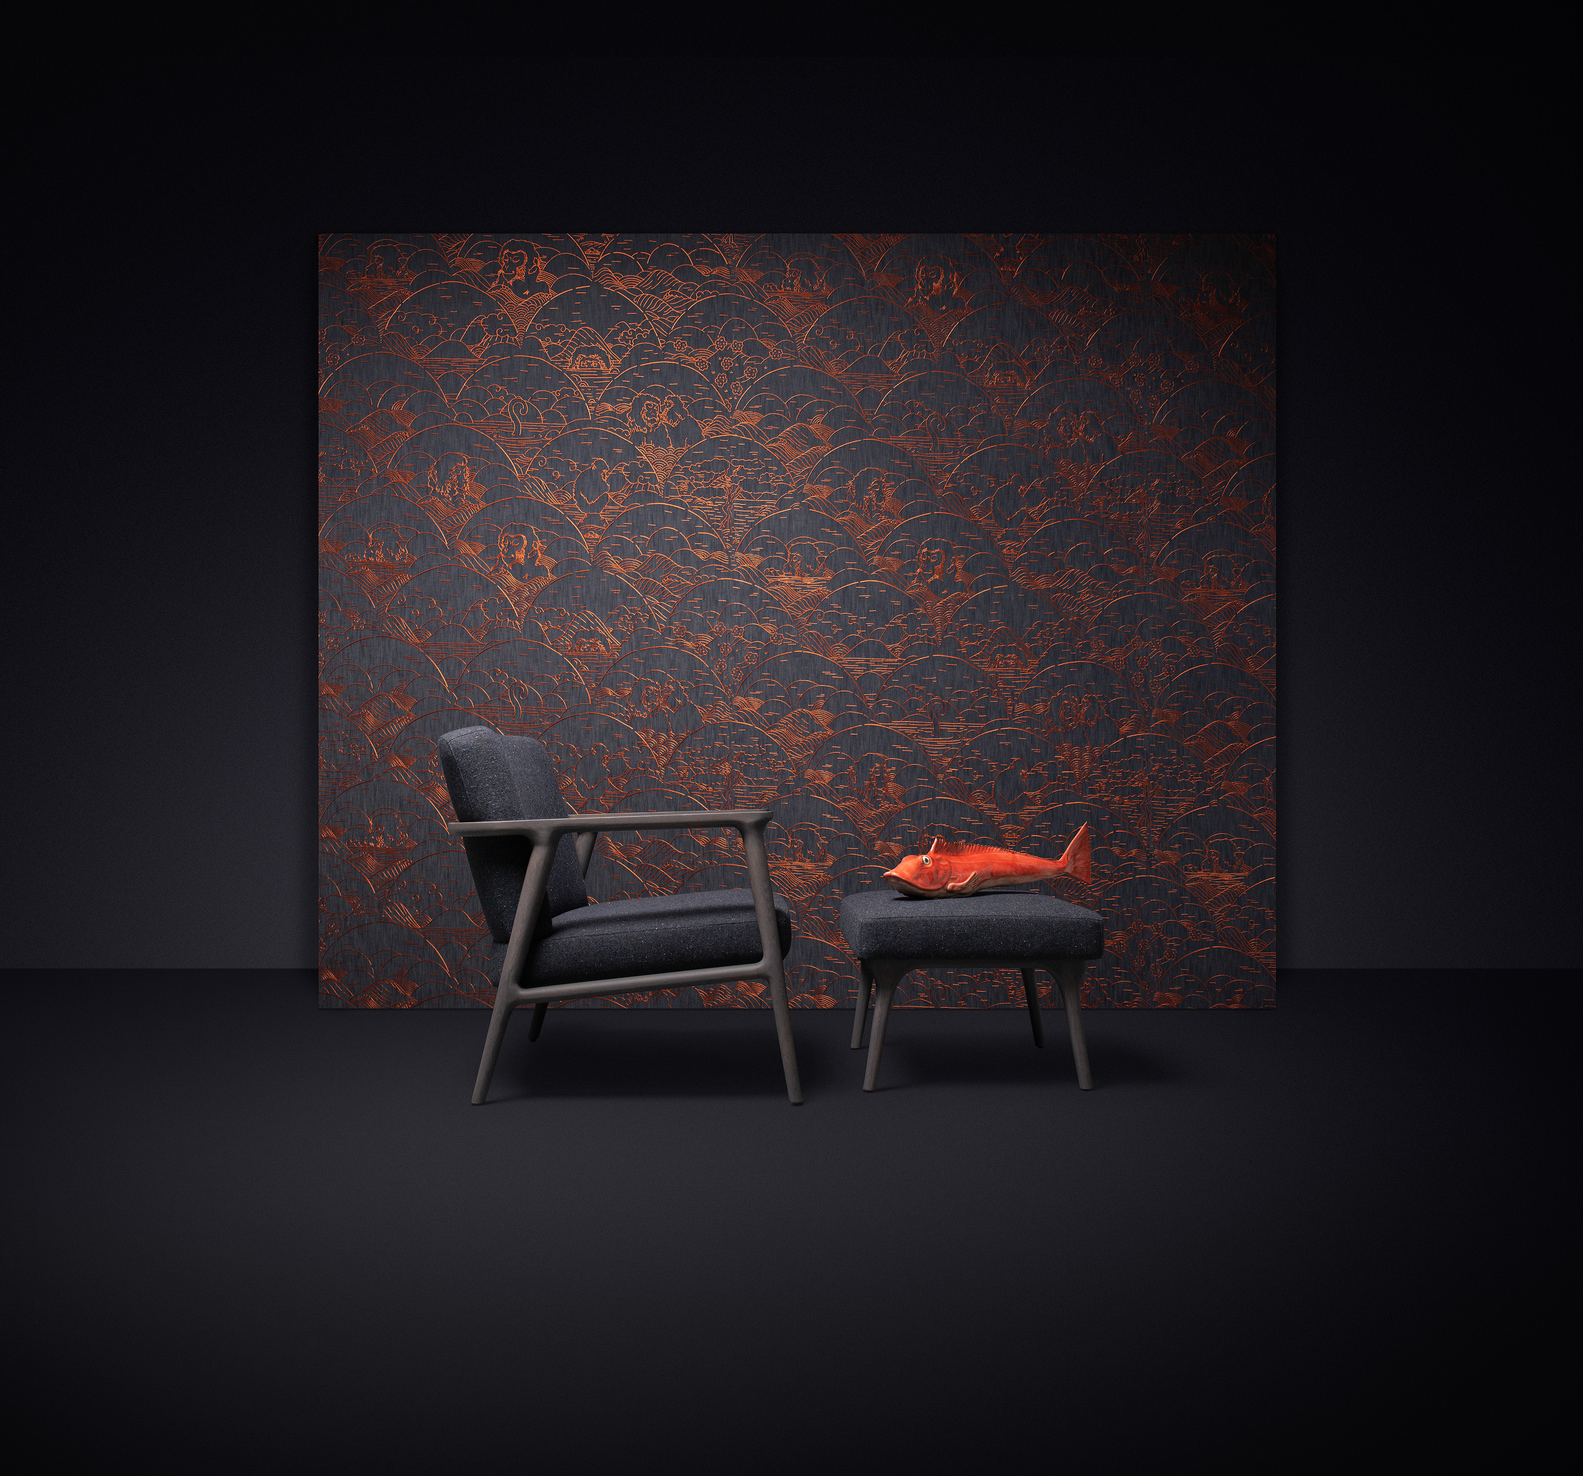 Poetic composition Zio Lounge Chair, Zio Footstool and Moooi Wallcovering Tokyo Blue